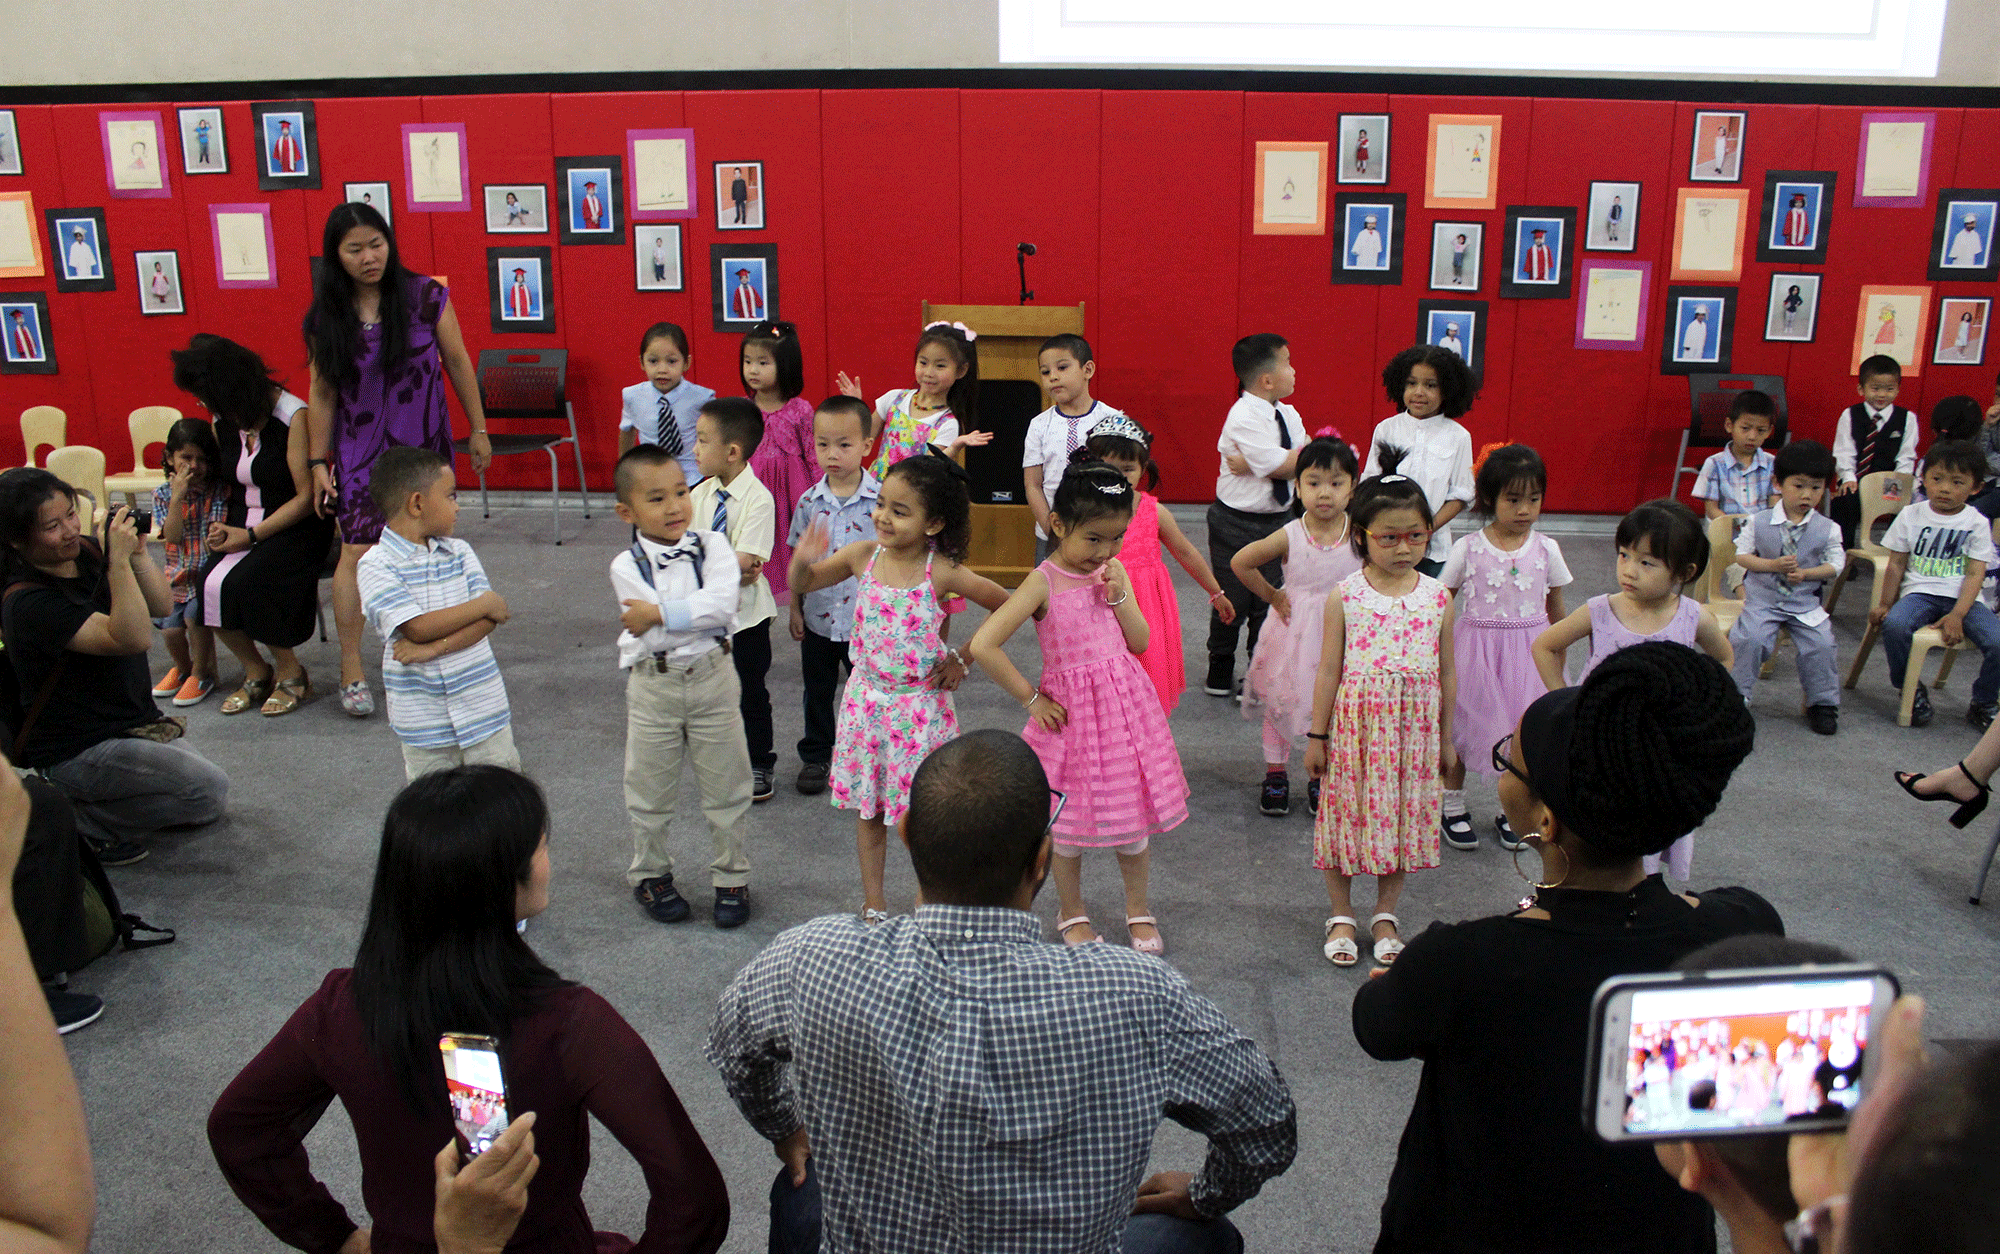 Young children from Early Childhood Education sing while audience watches